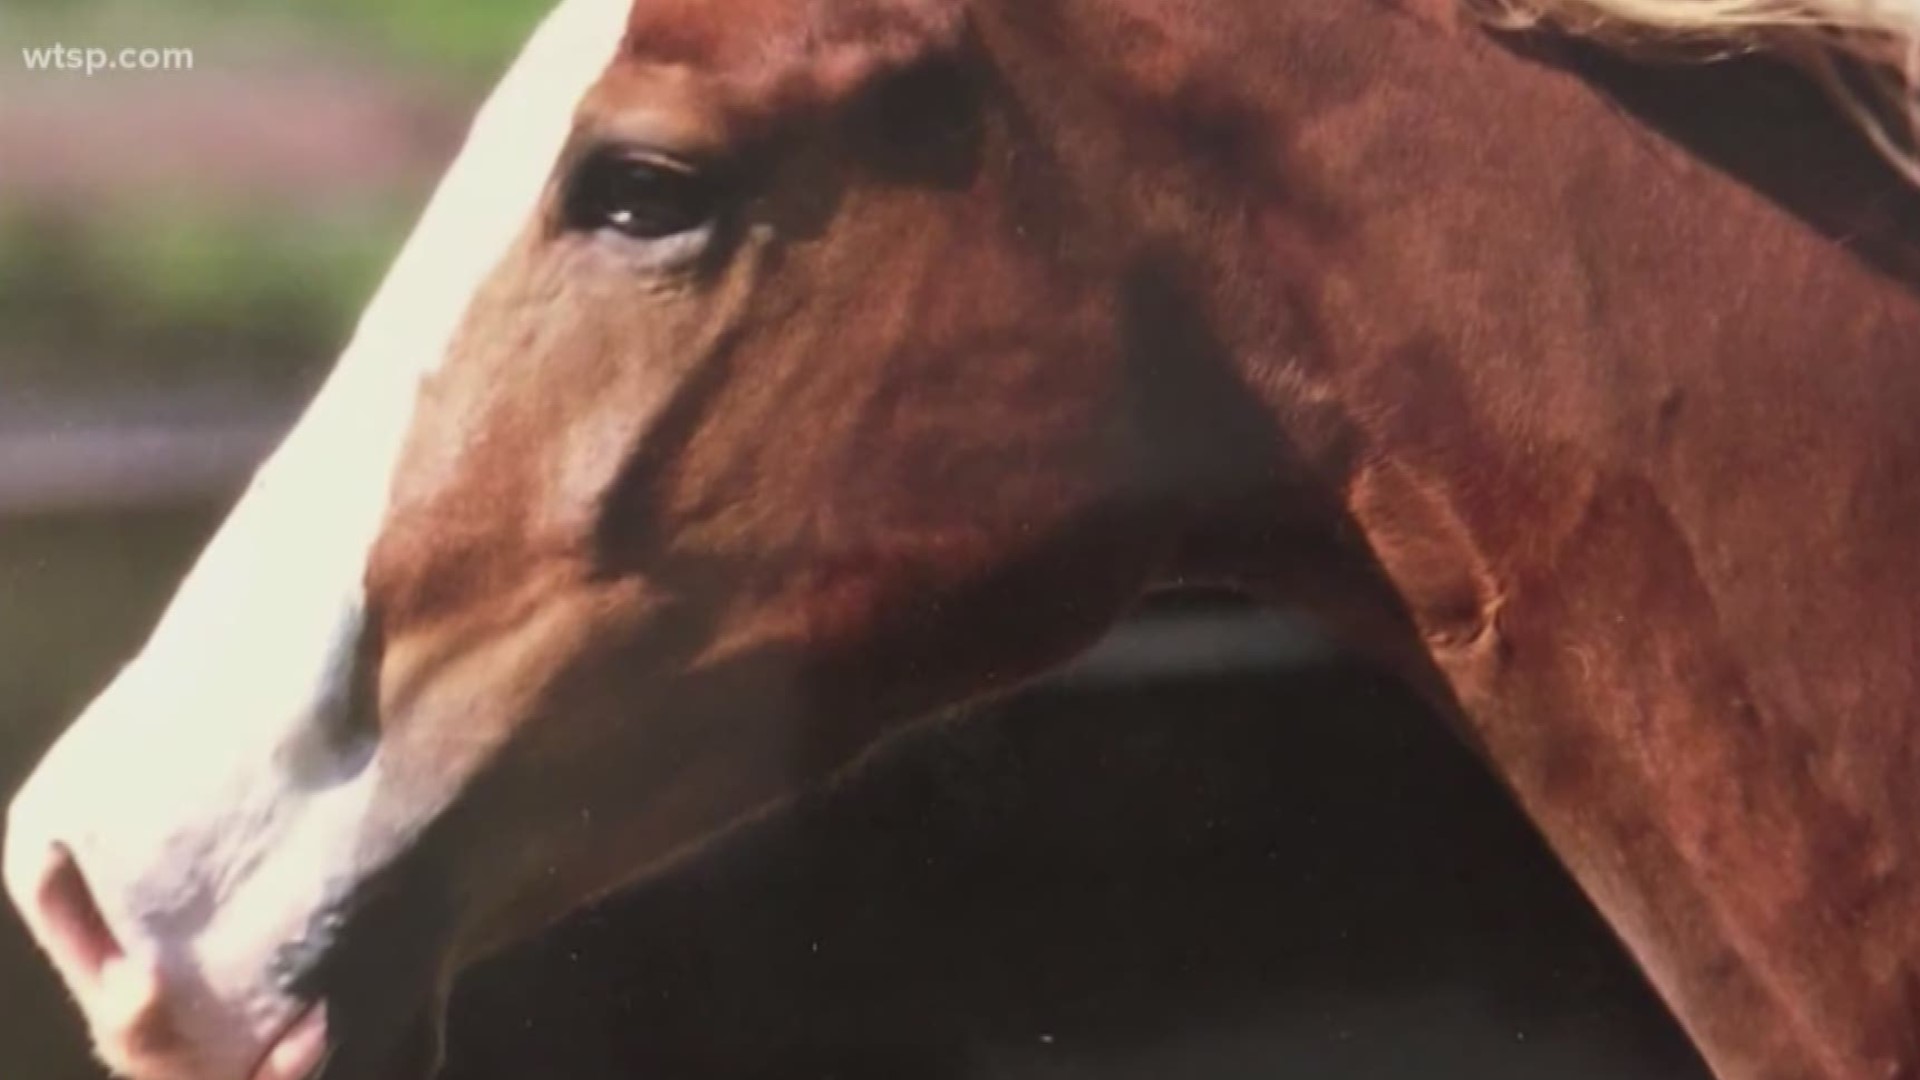 Agencies across the state are working together to investigate potential connections between the slaughters in Marion, Manatee, and Sumter counties.